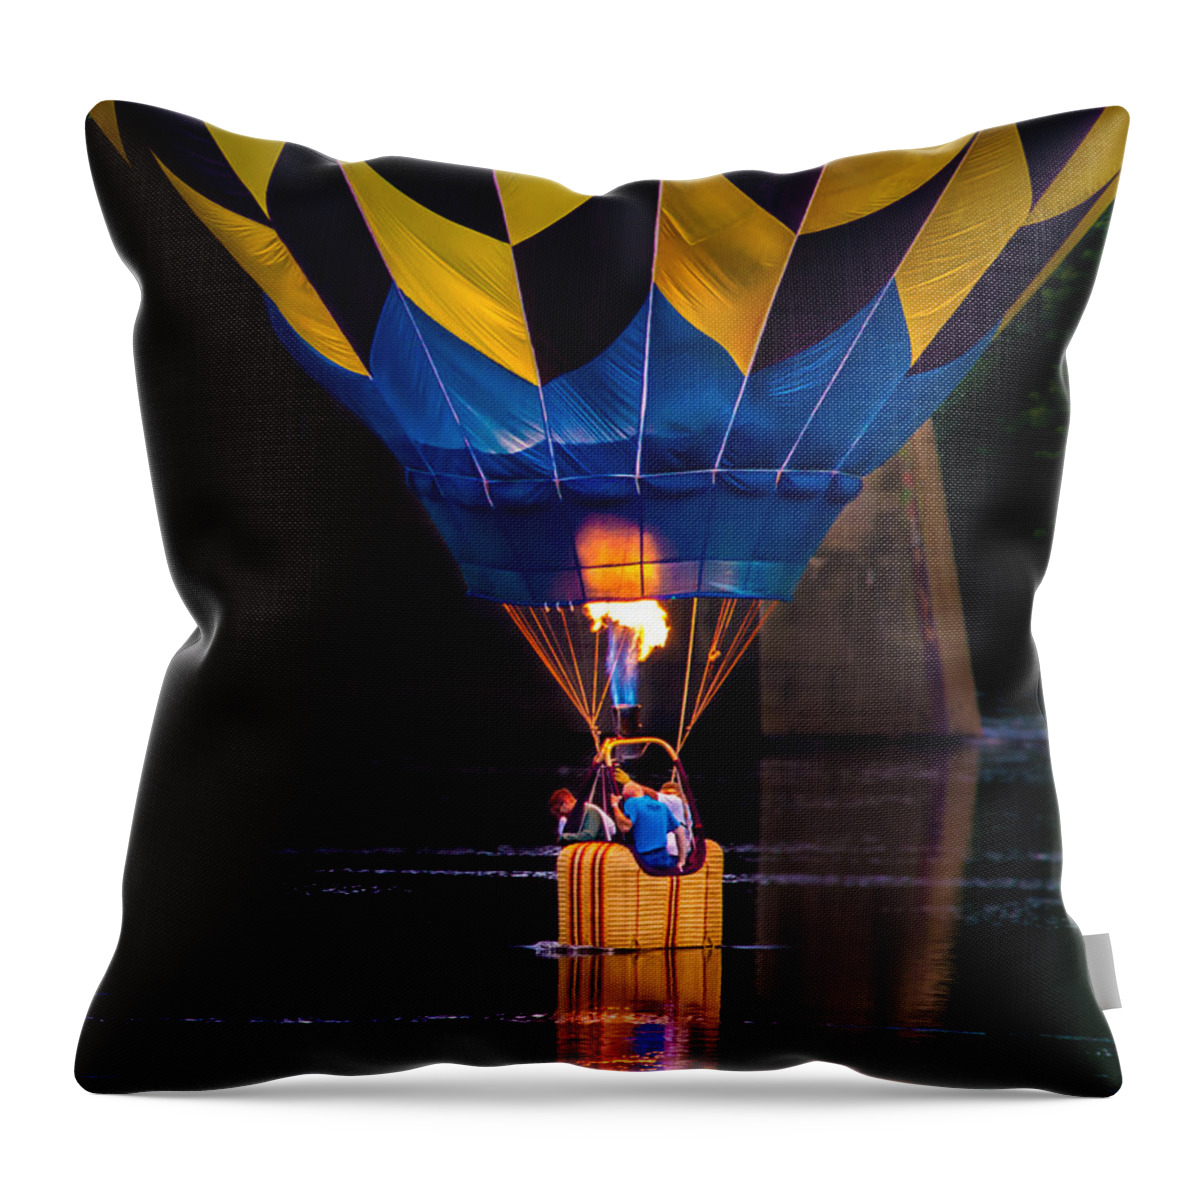 Water Scraping Throw Pillow featuring the photograph Dipping The Balloon Basket by Bob Orsillo